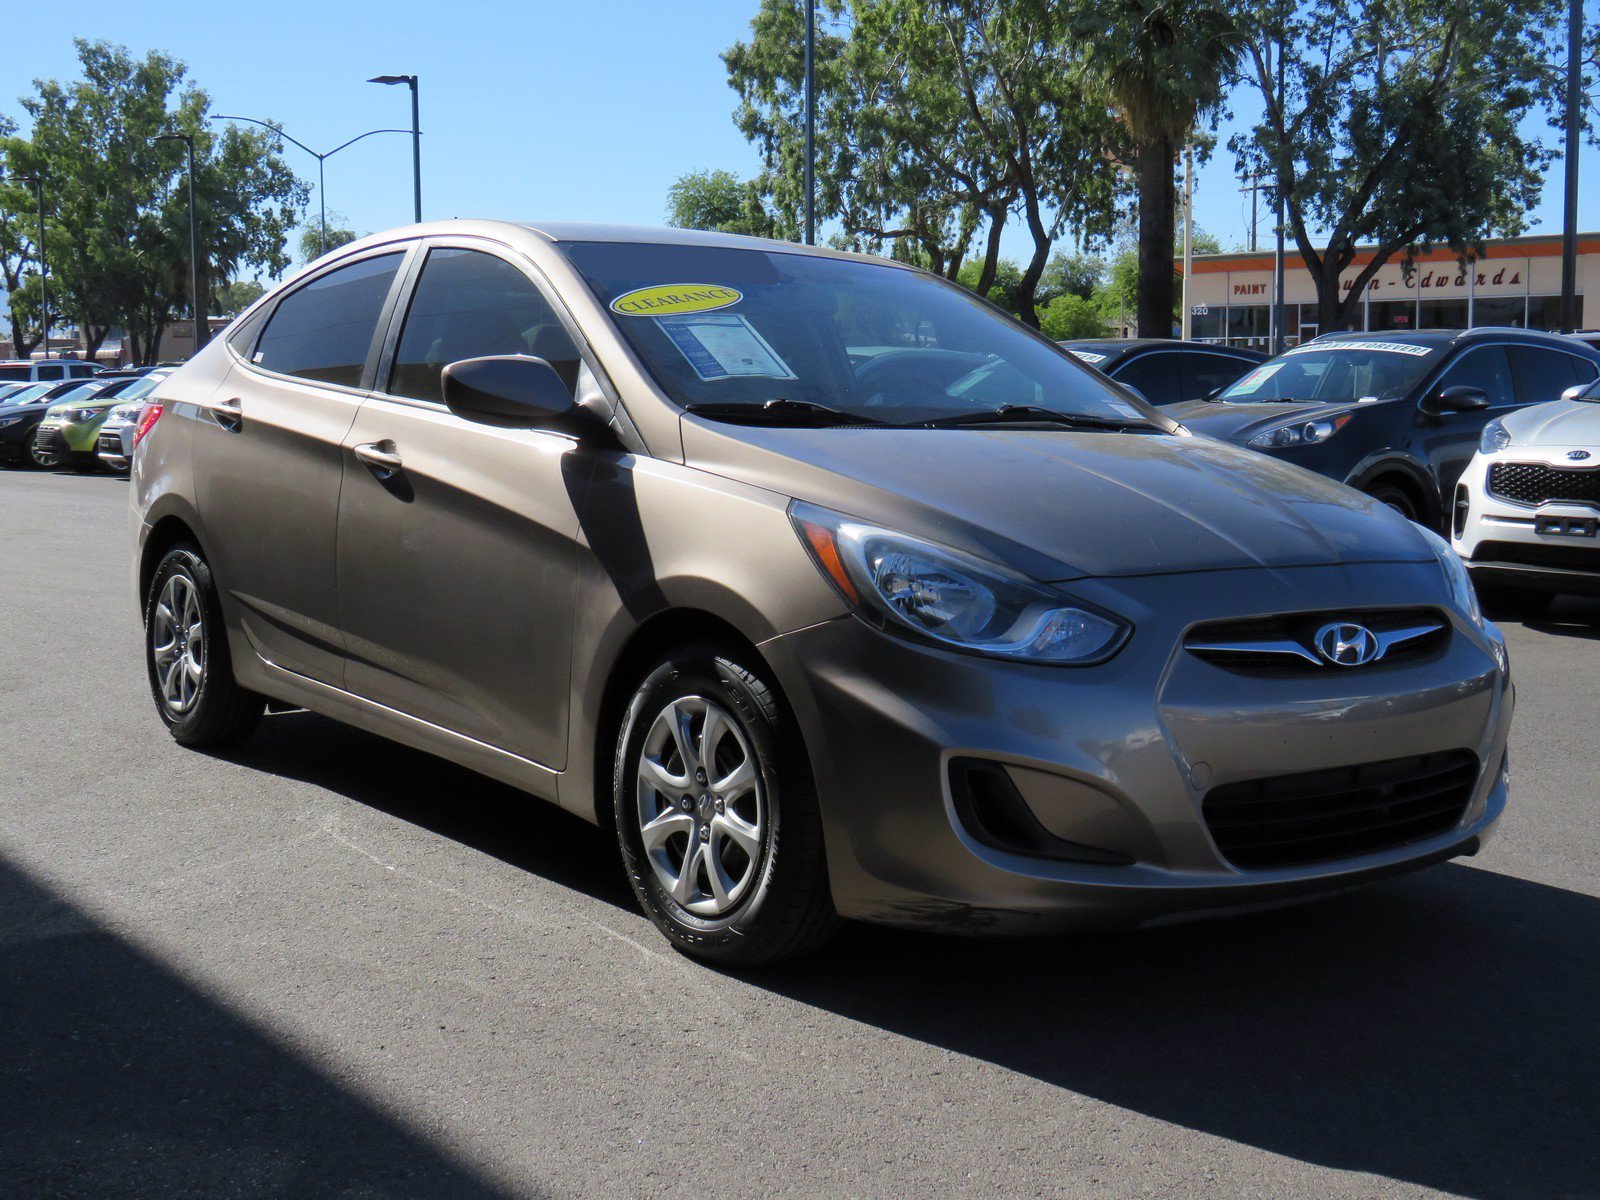 Pre-Owned 2013 Hyundai Accent FWD GLS in Tucson #W40K24187A | MINI of ...